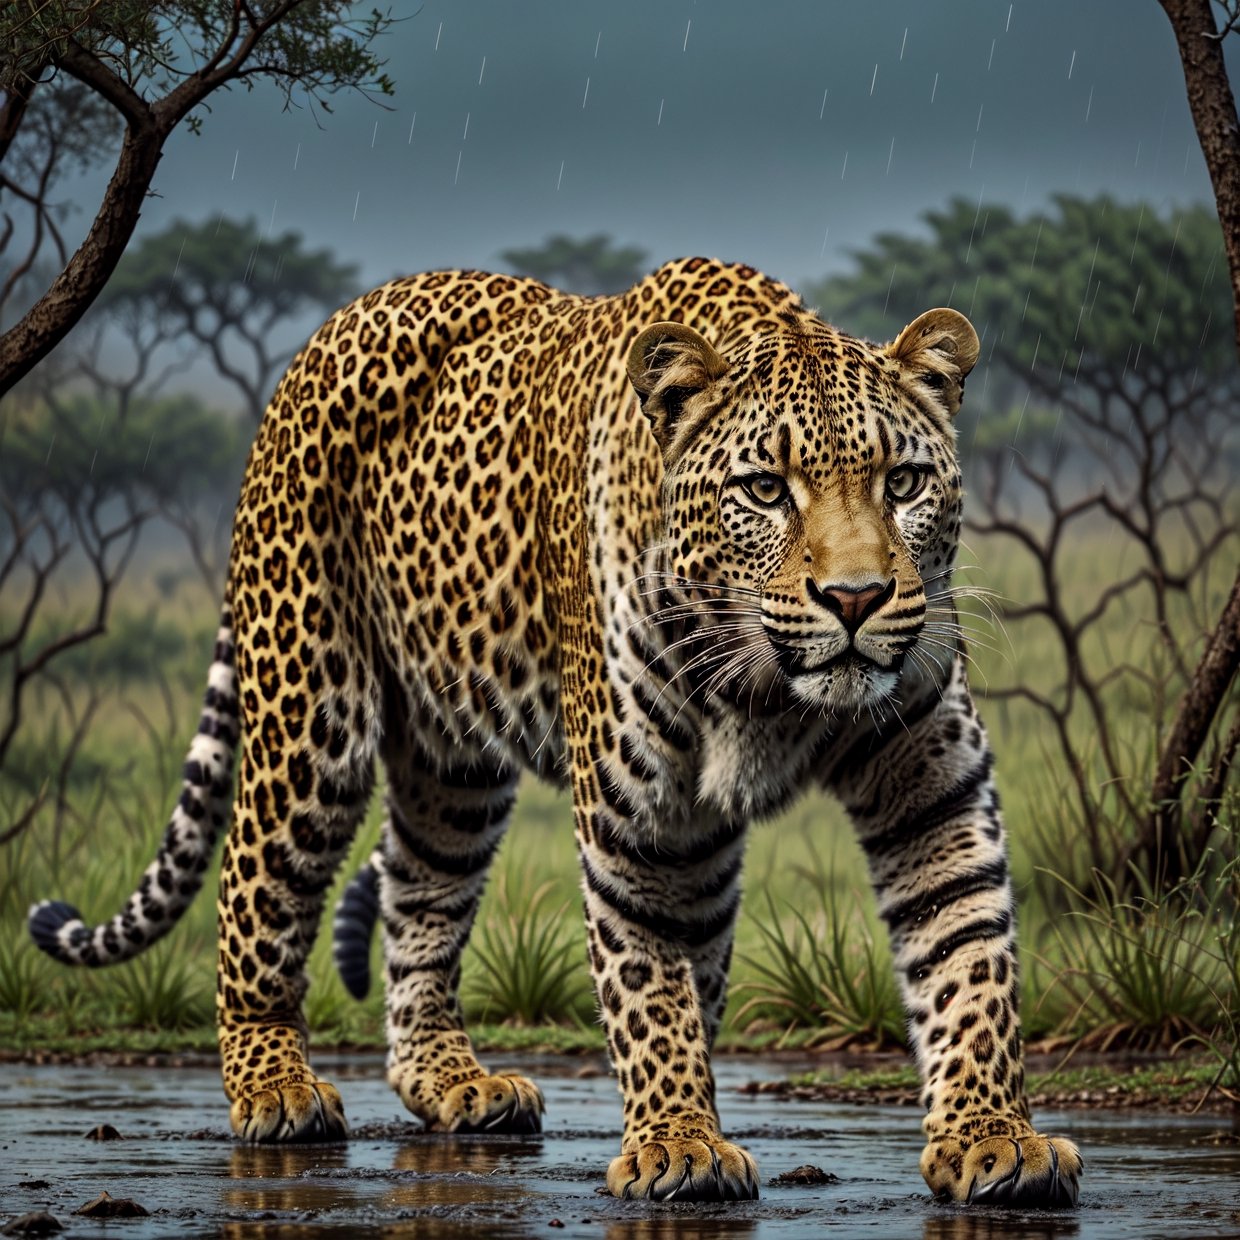 a leopard in a rainy savanna at dusk, realistic, 4k, extremely detailed, highly detailed animal, realistic fur, realistic lighting, dramatic lighting, moody atmosphere, muted colors, beautiful cinematic composition, photorealistic, award winning photograph